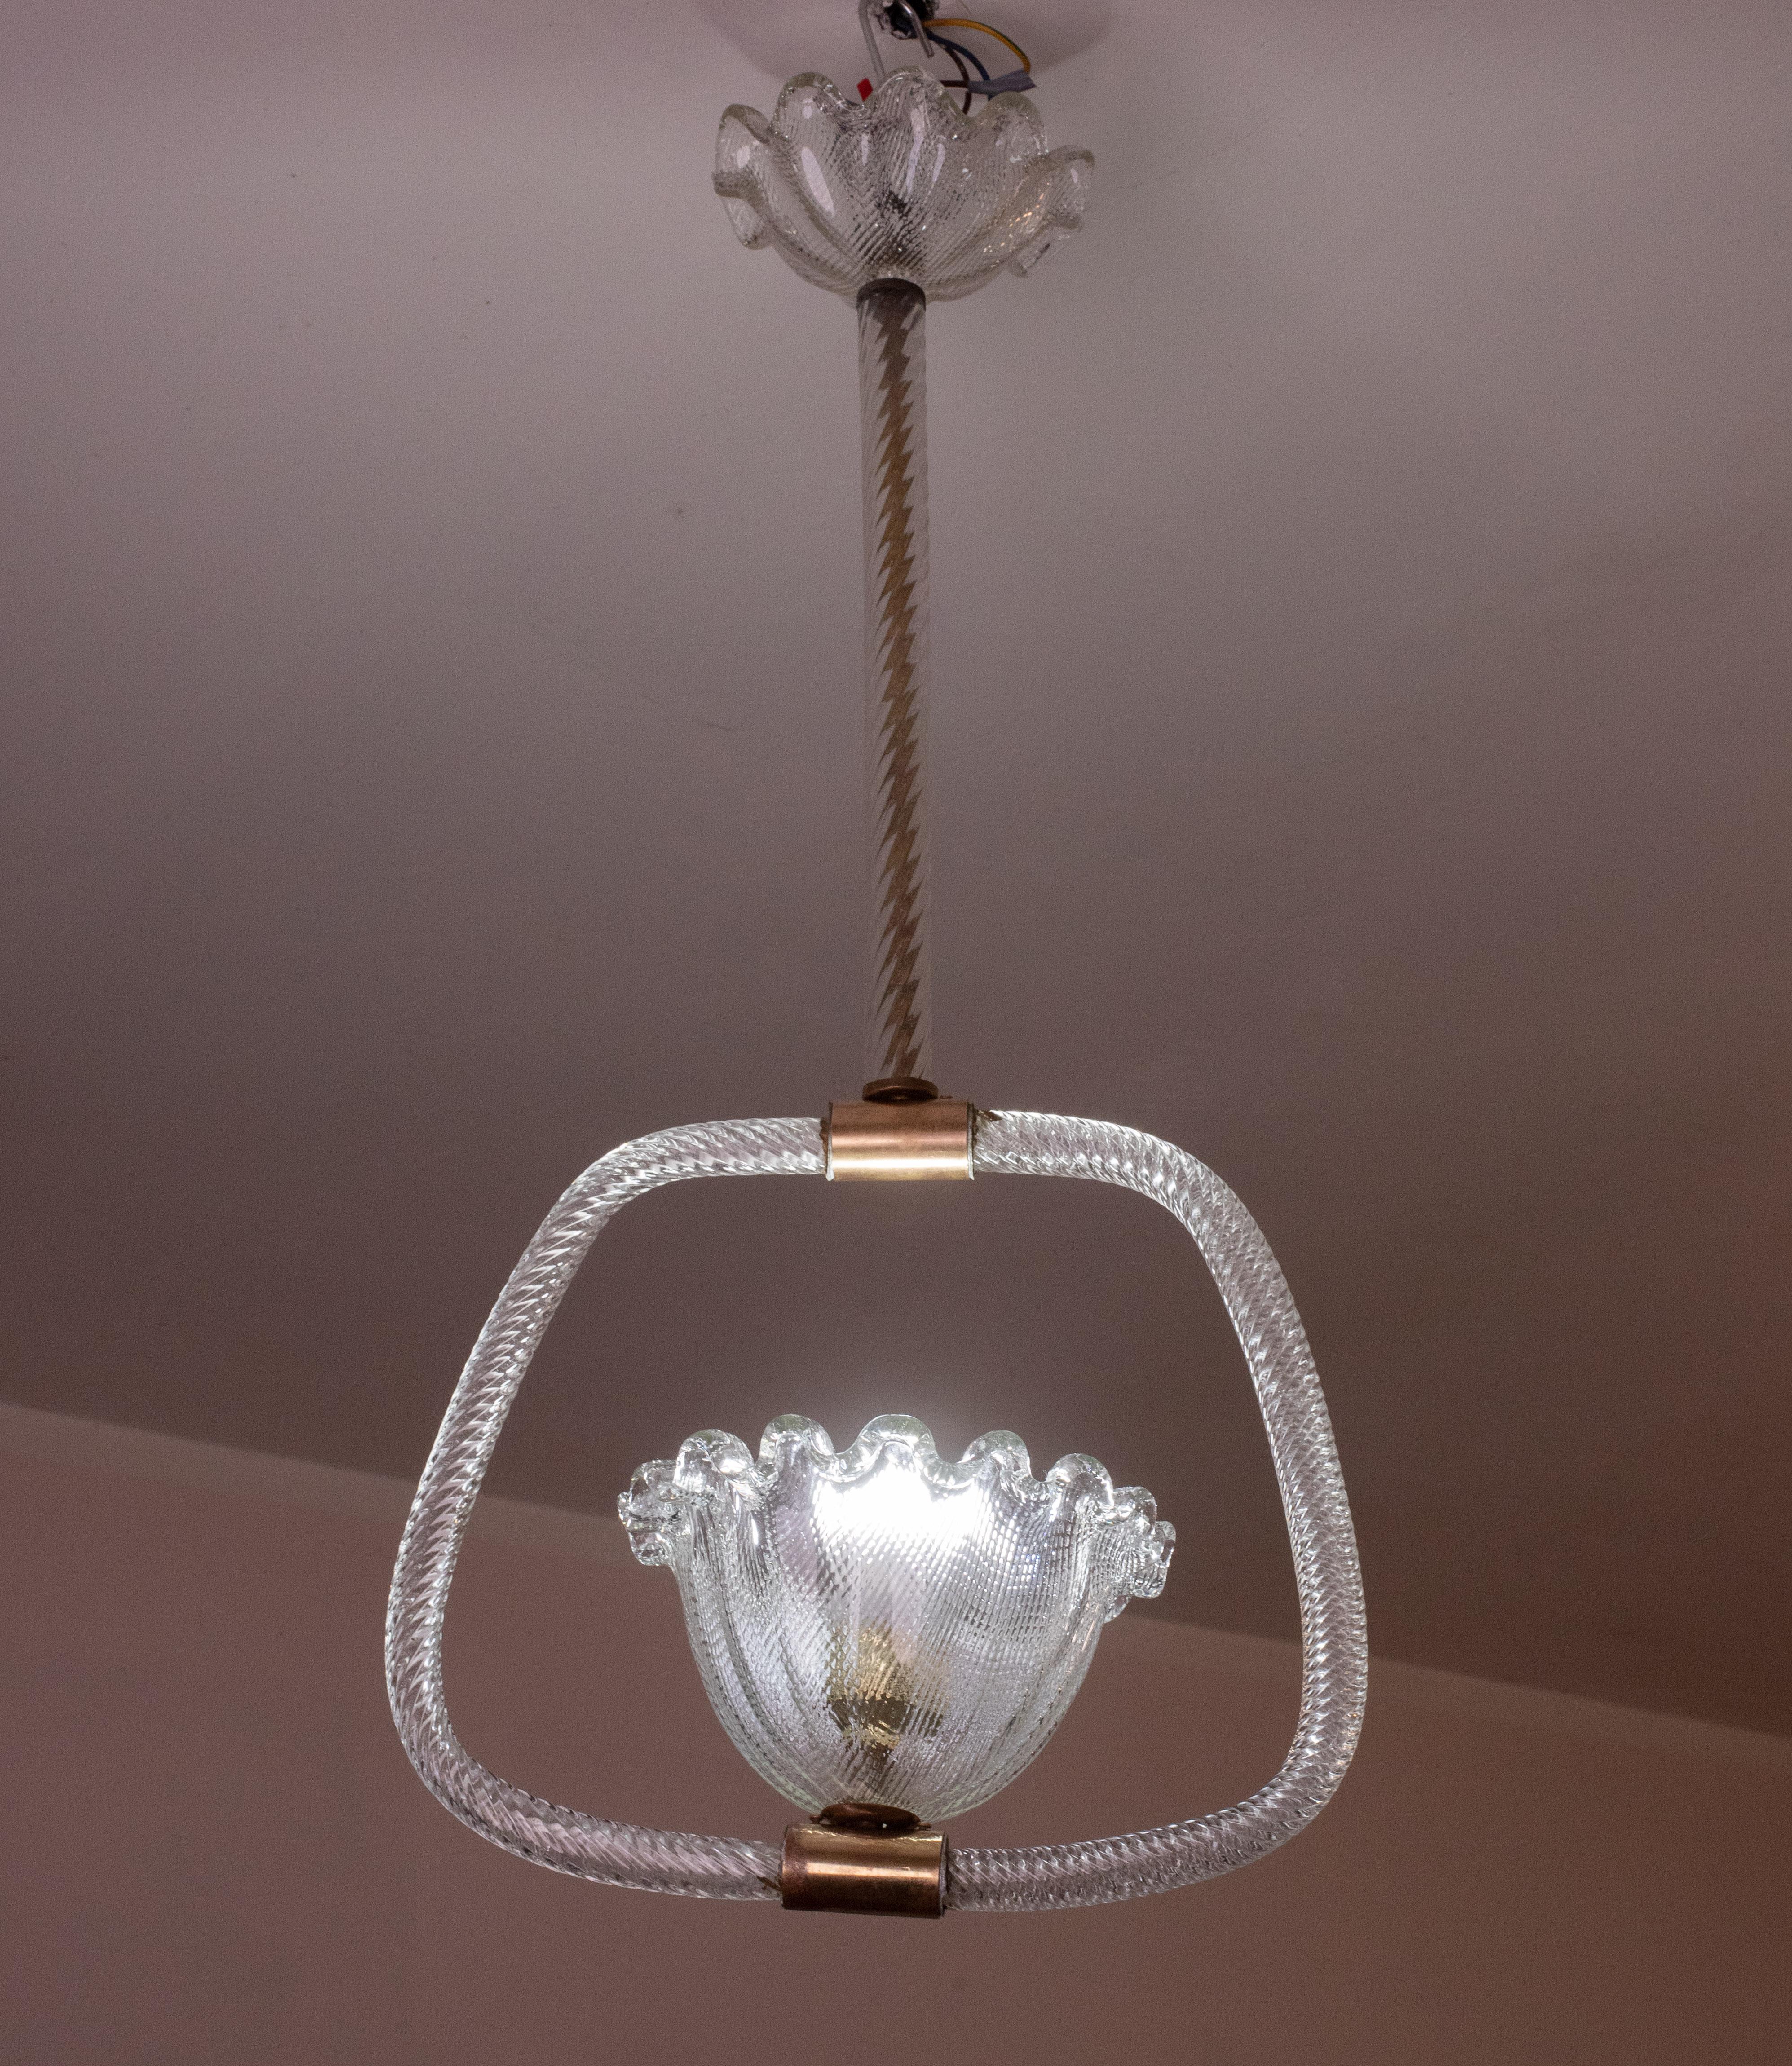 Small pendant lamp by Barovier & Toso, hand blown, with brass fittings. The chandelier is 80 cm high, 35 cm wide. The fixture requires a European E27 / 110 Volt Edison bulb, up to 60 watts. A beautiful light for any space.